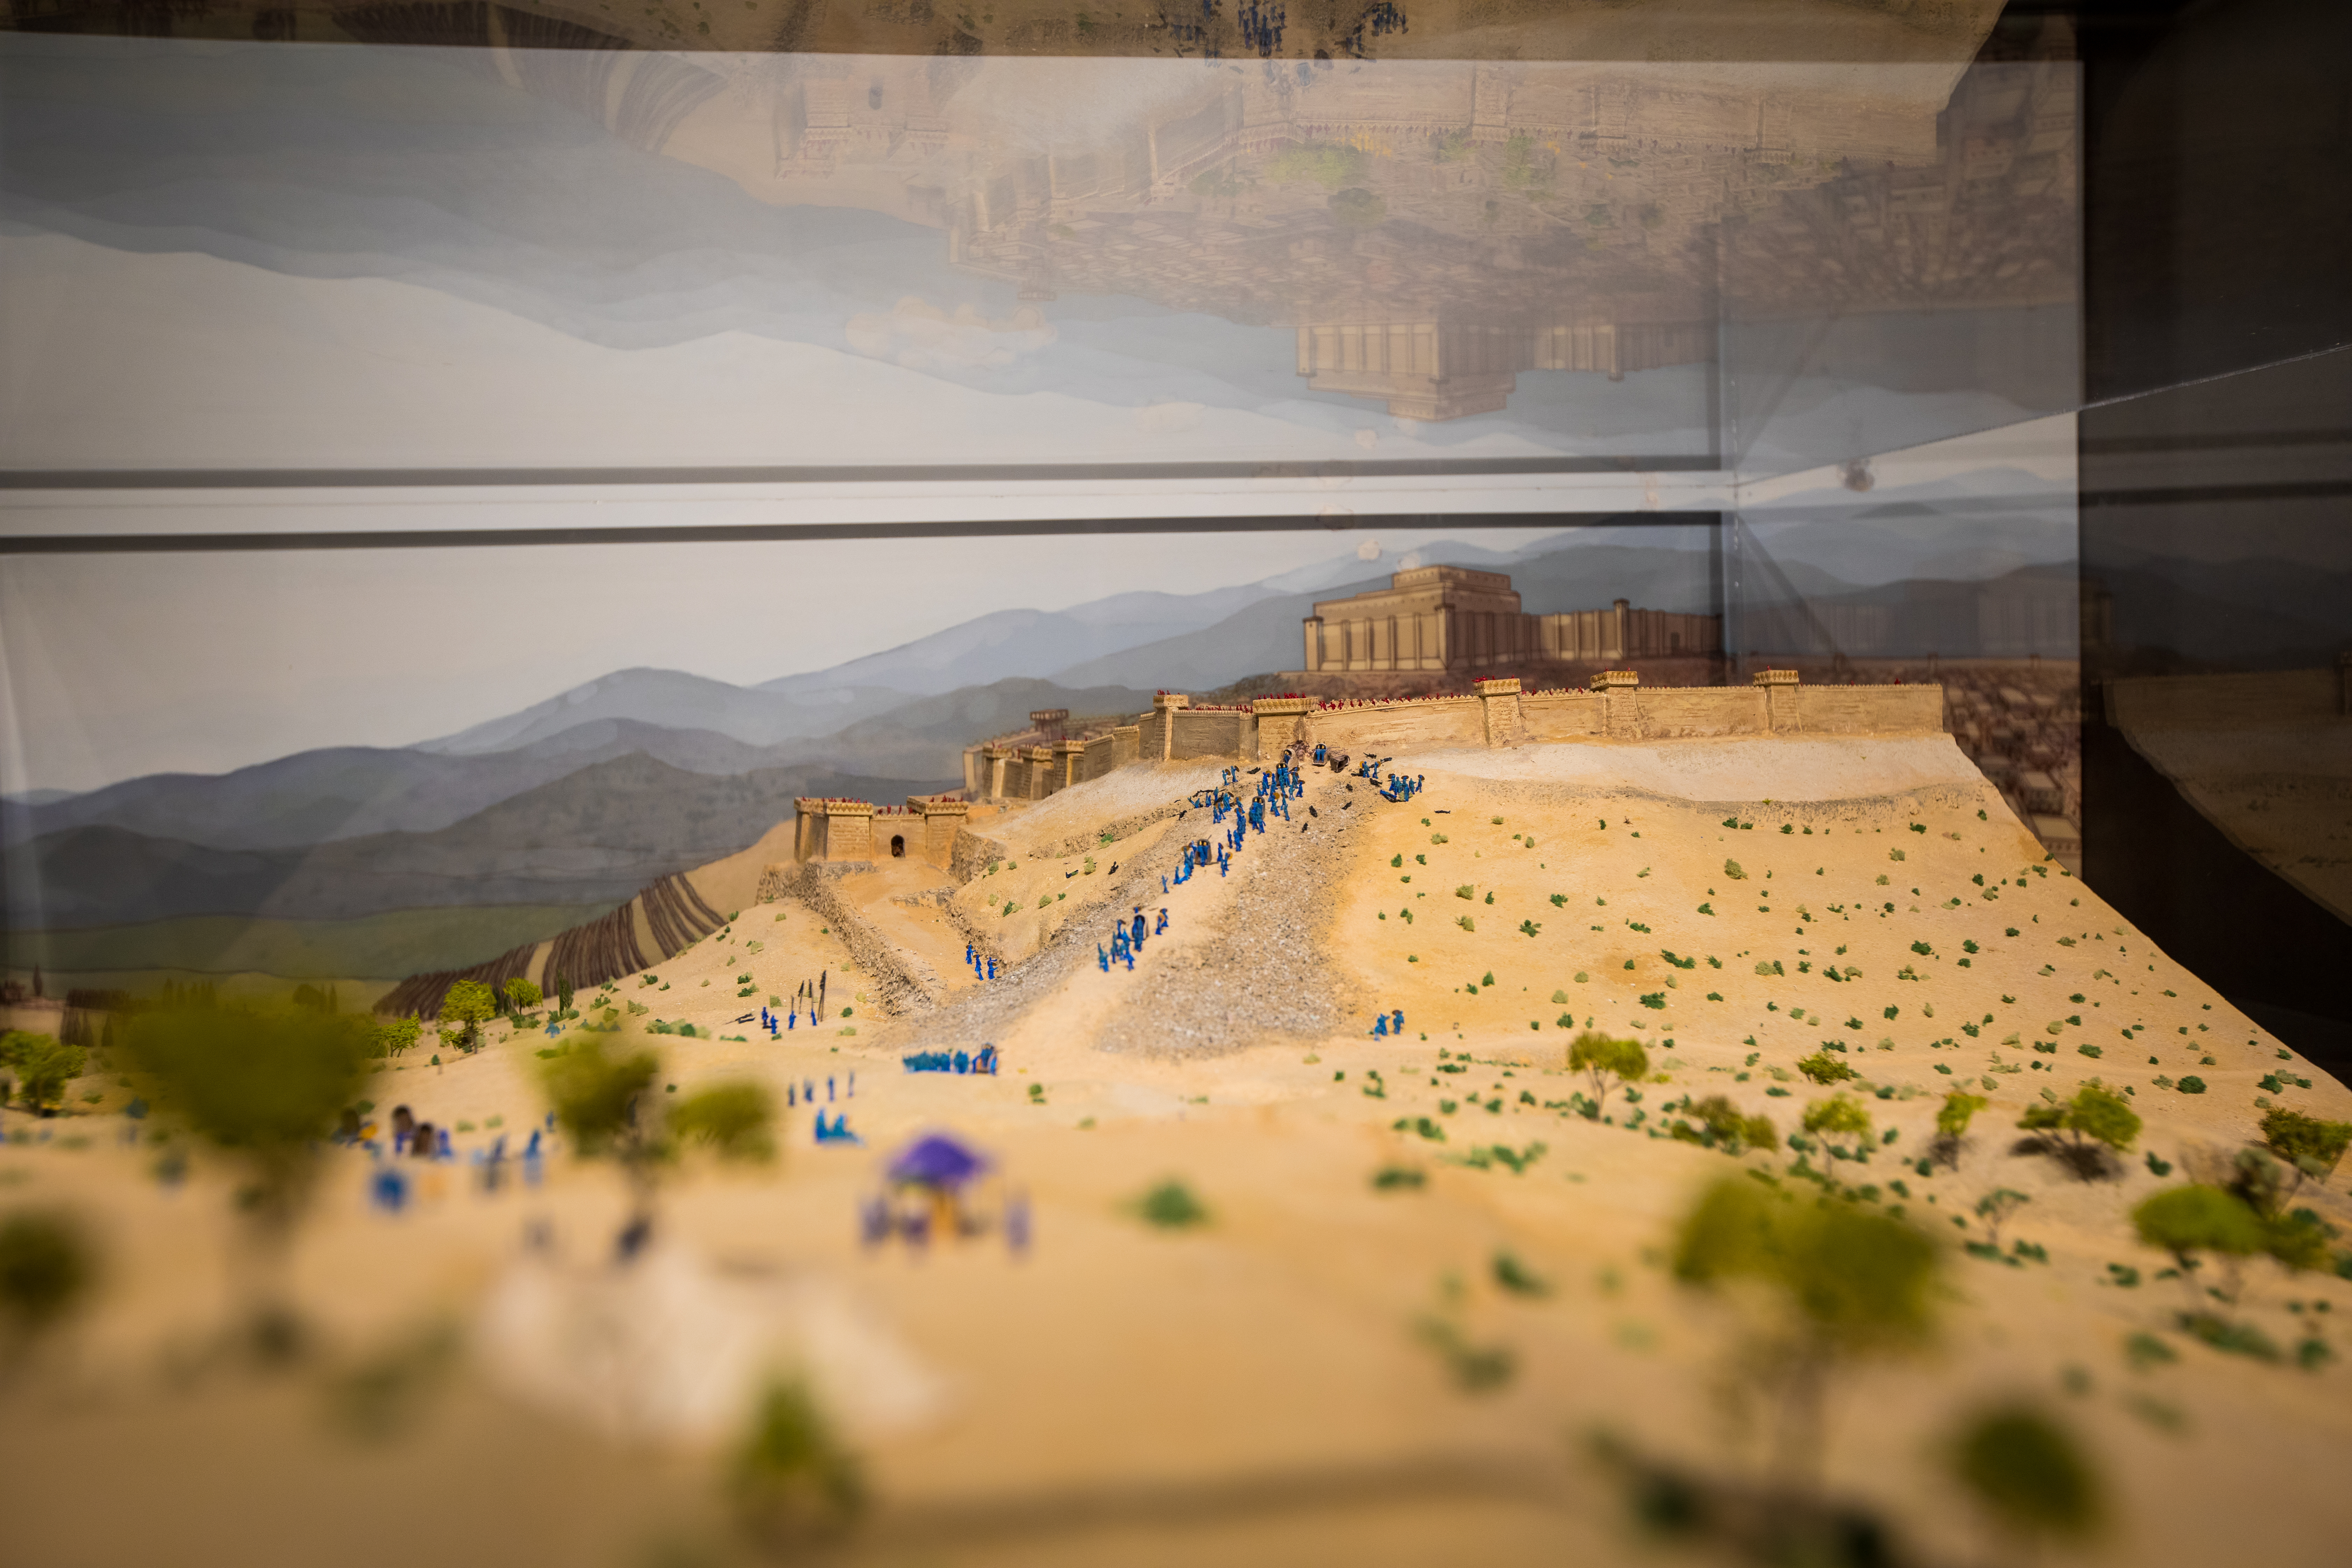 The model shows the city of Lachish under Assyrian attack.